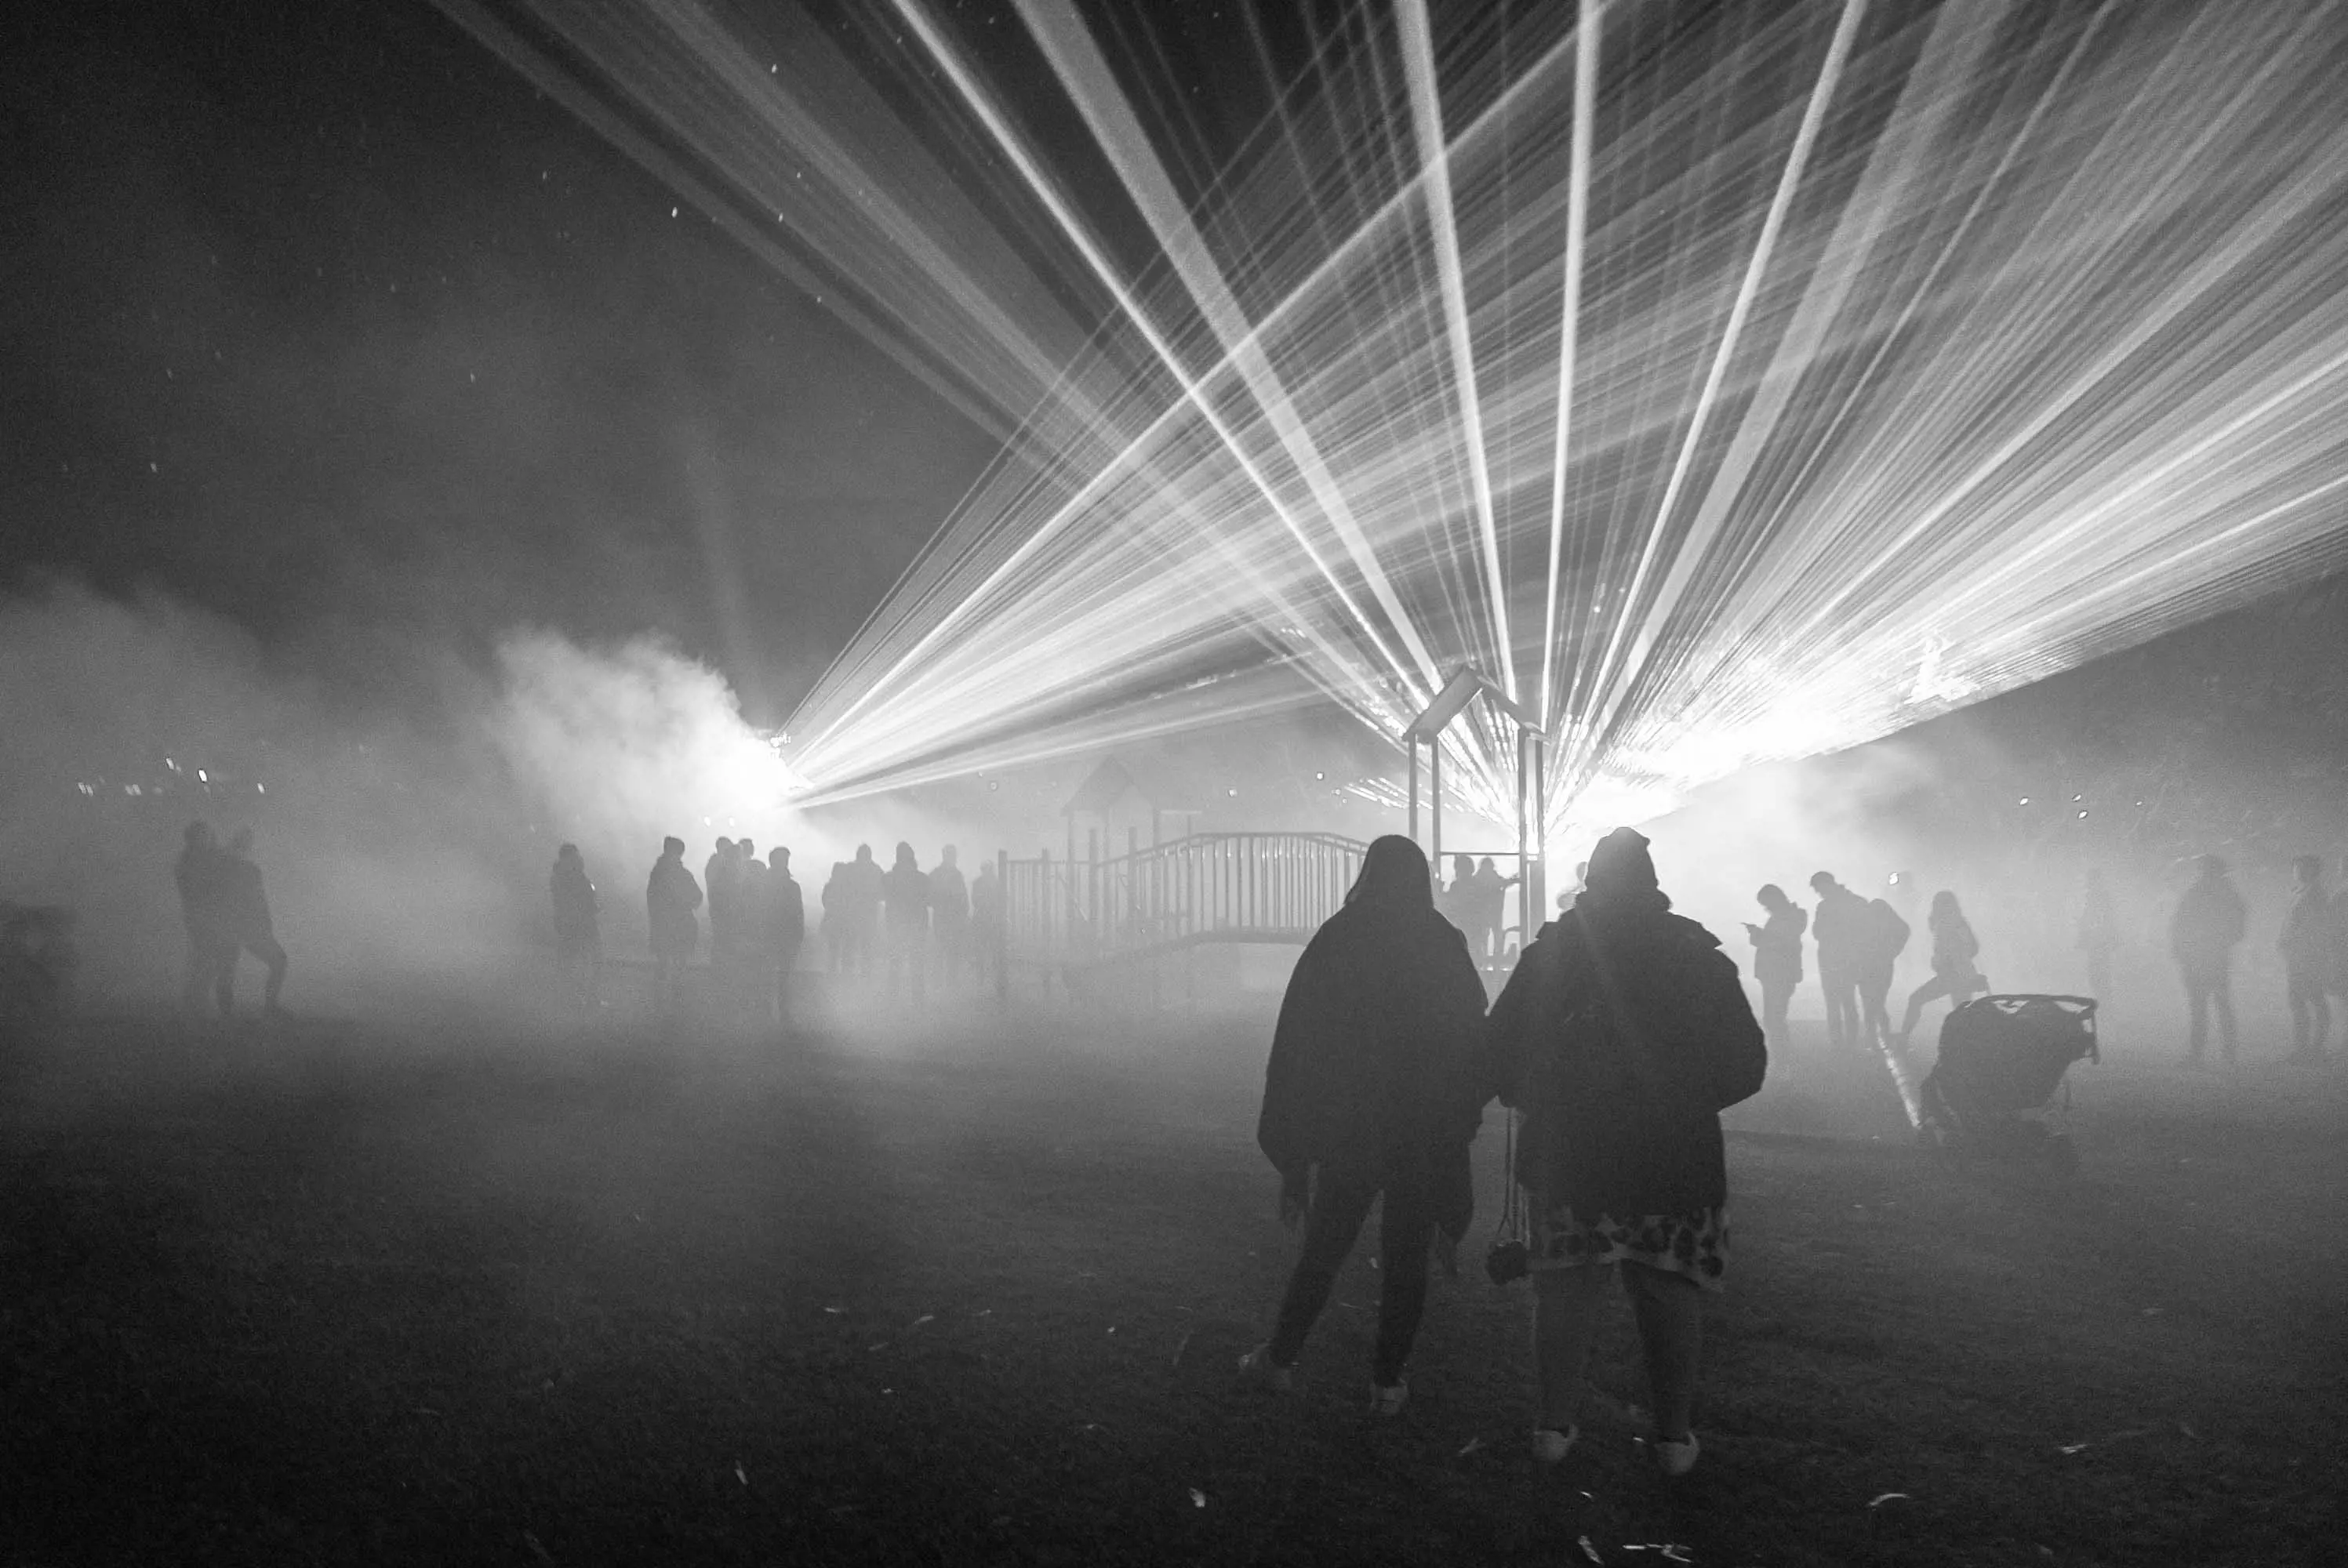 People walk through a dark, smoke filled park. Lasers shine through through and illuminate the smoke and the crowd.